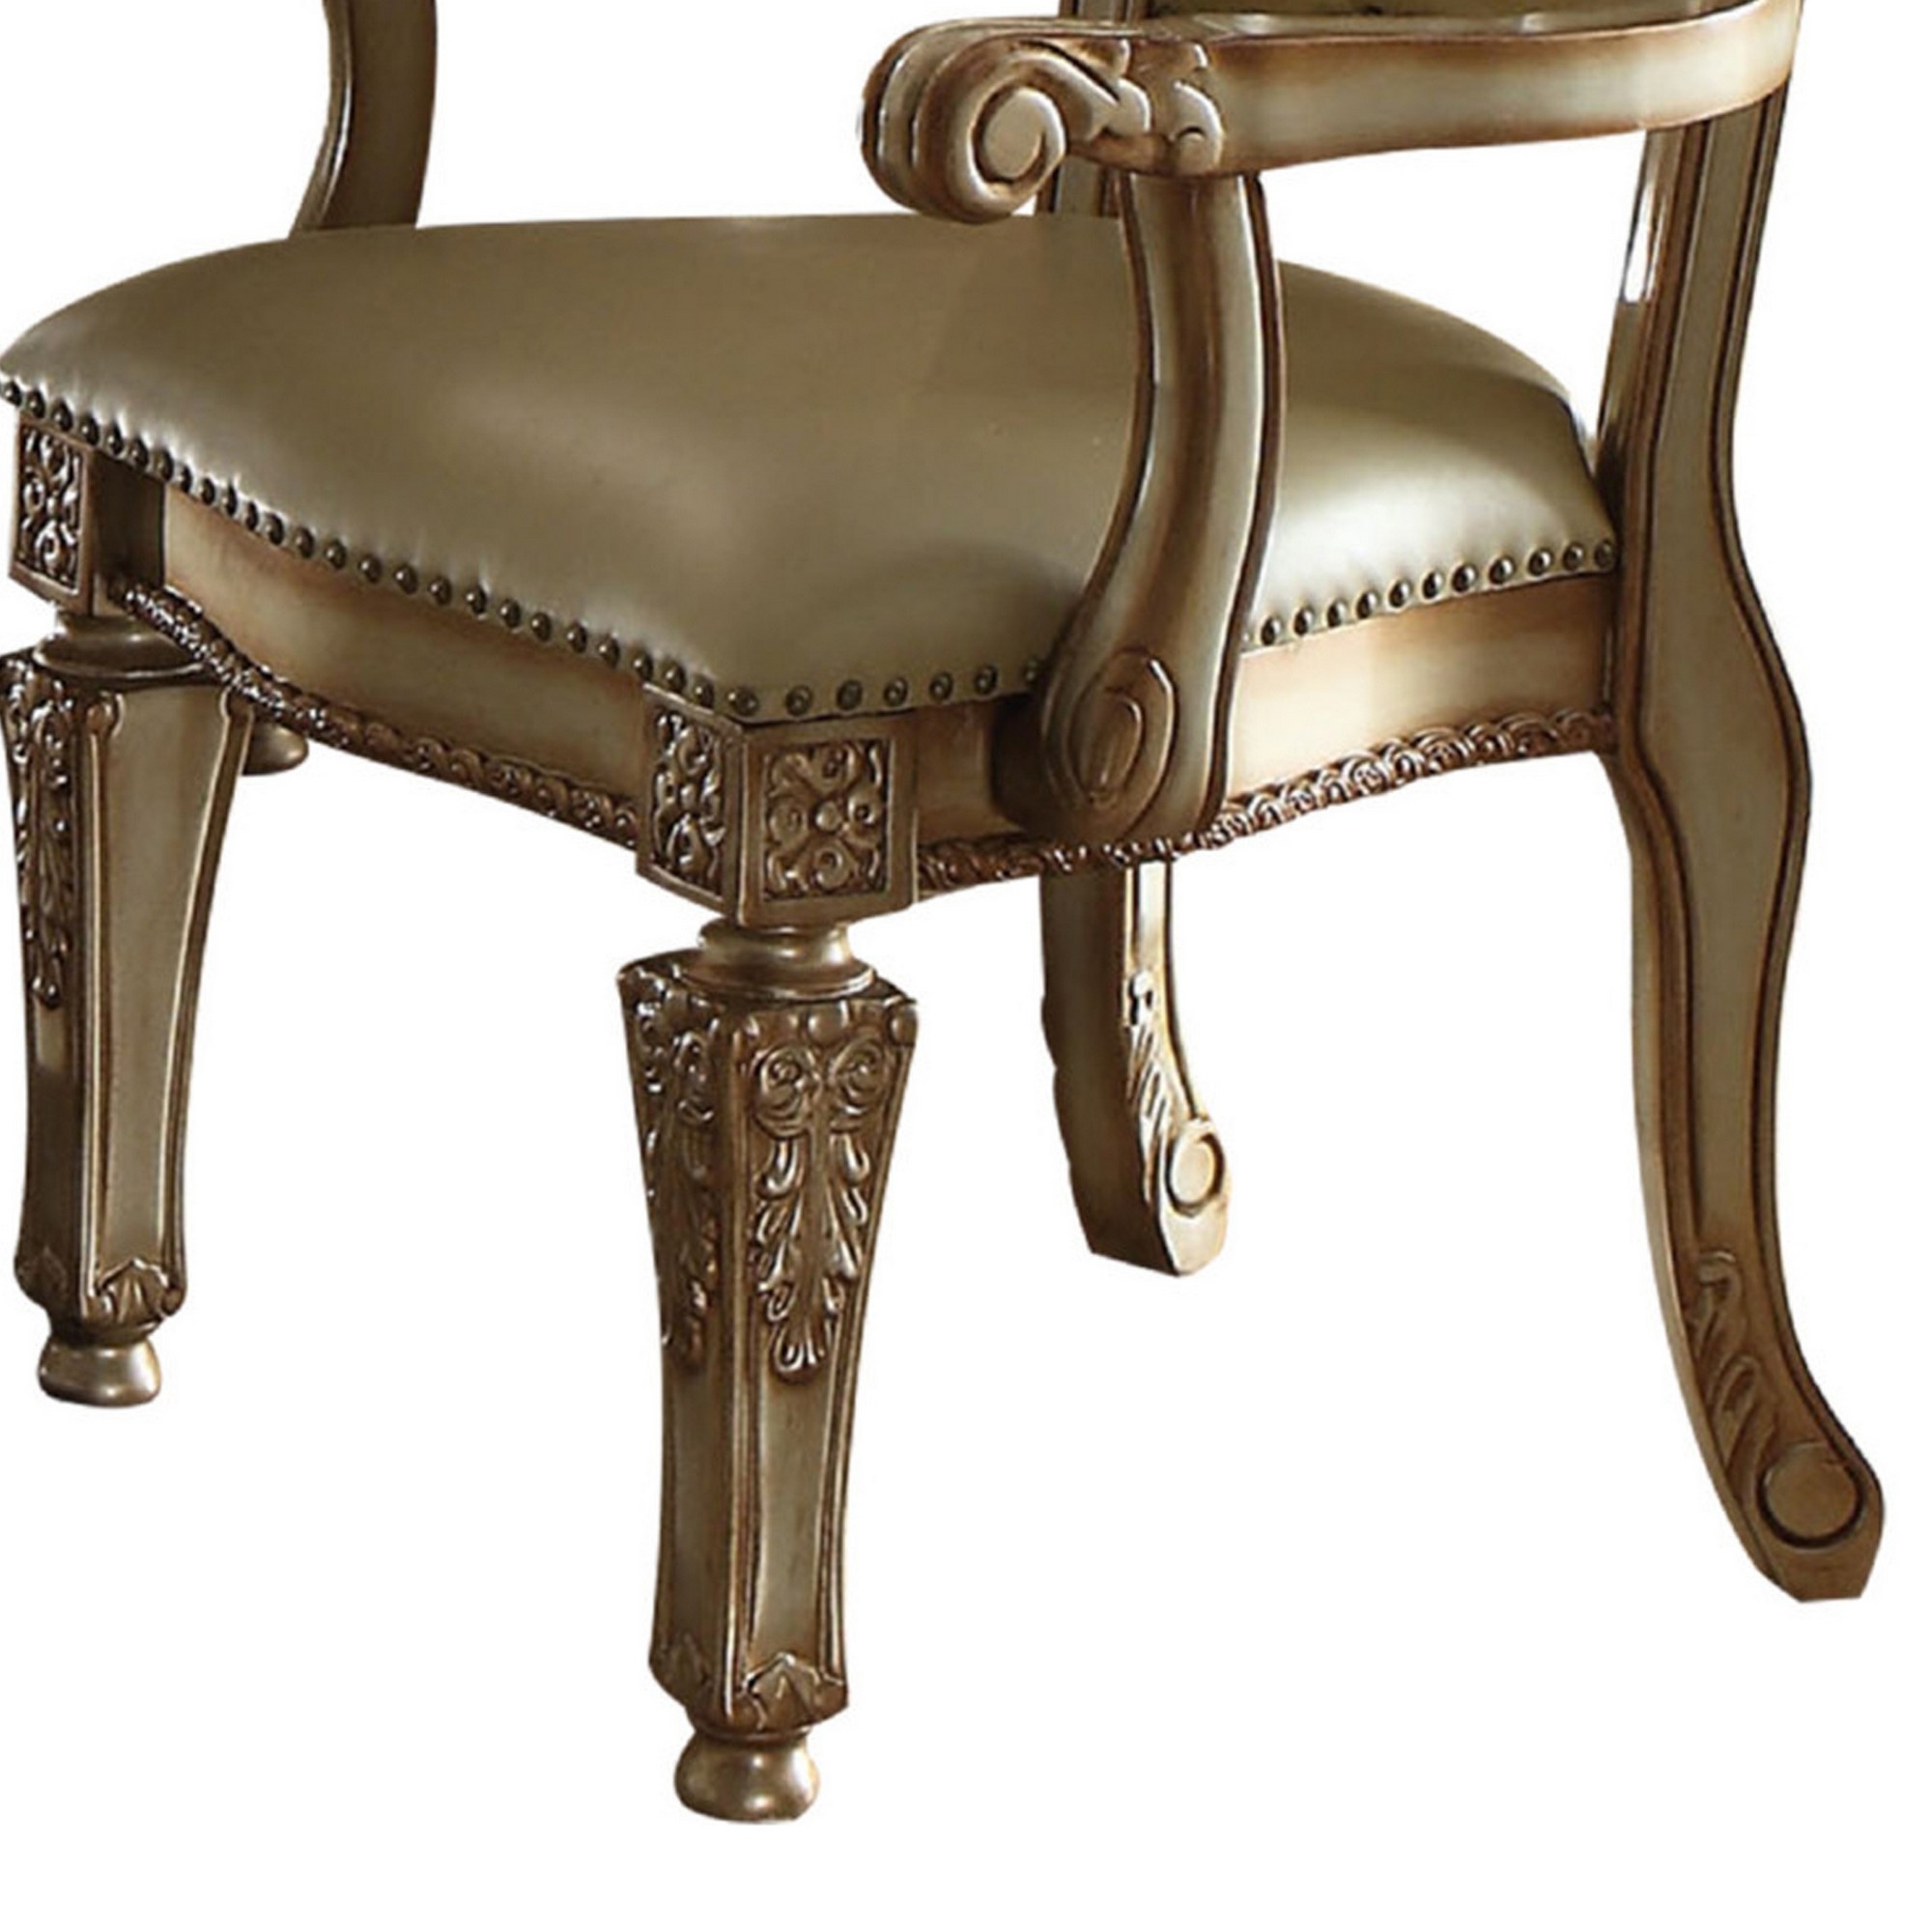 Leatherette Wooden Arm Chair With Button Tufted Details, Set Of 2, Gold- Saltoro Sherpi